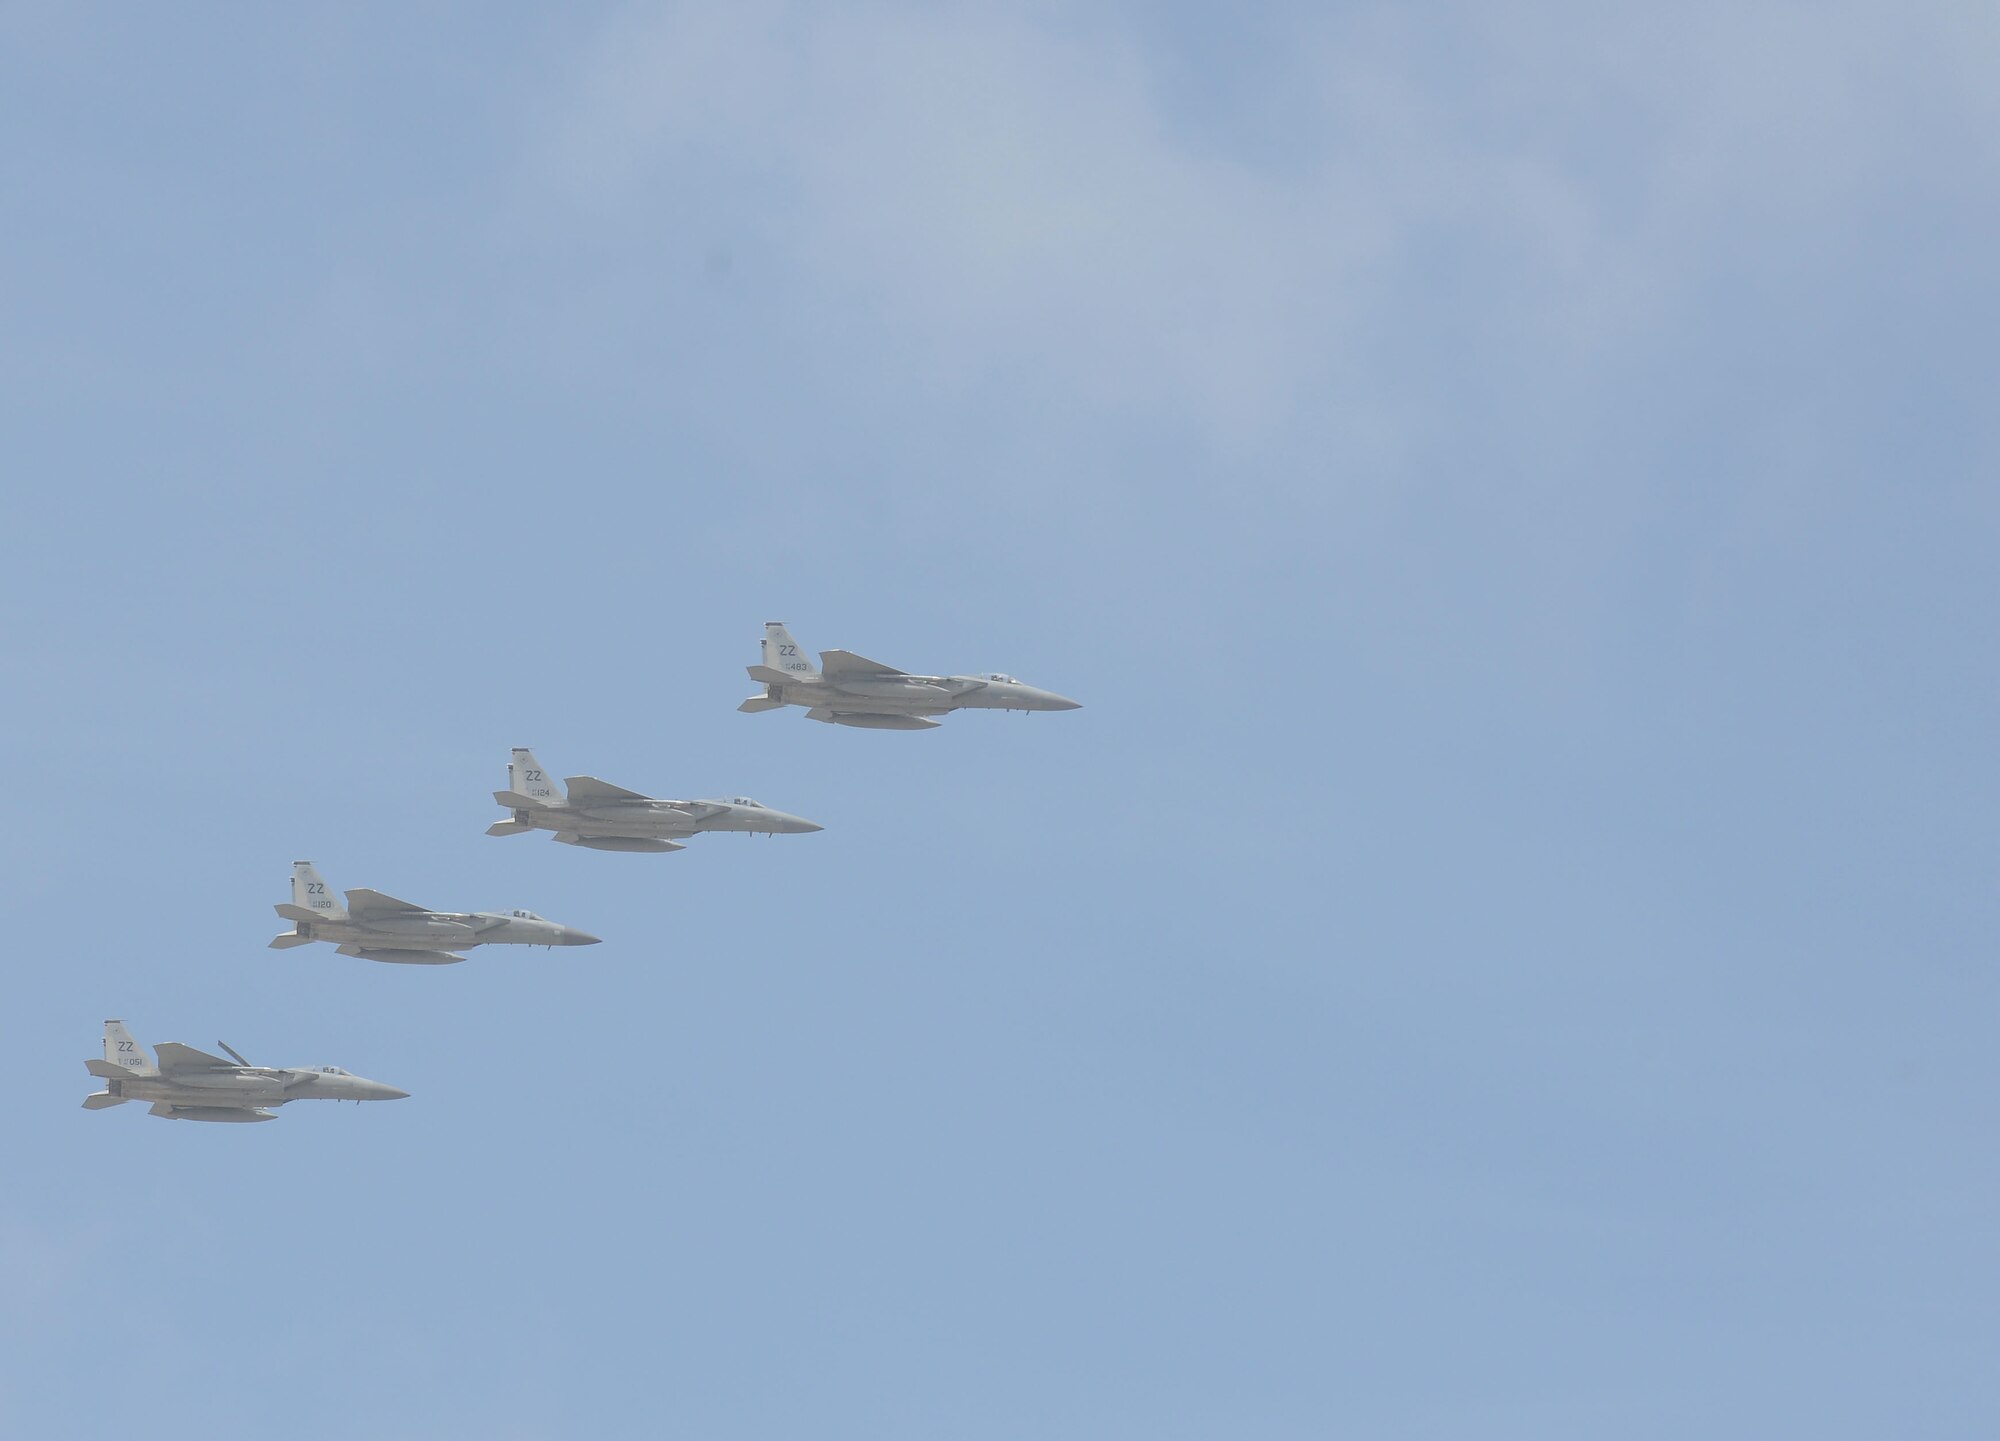 F-15 Eagles fly in formation Feb. 20 during the 2016 Pacific Air Partners Open House at Andersen Air Force Base, Guam. The open house showcased the things Airmen do and the capabilities of some of the world's strongest air forces. (U.S. Air Force photo/Airman 1st Class Arielle Vasquez)